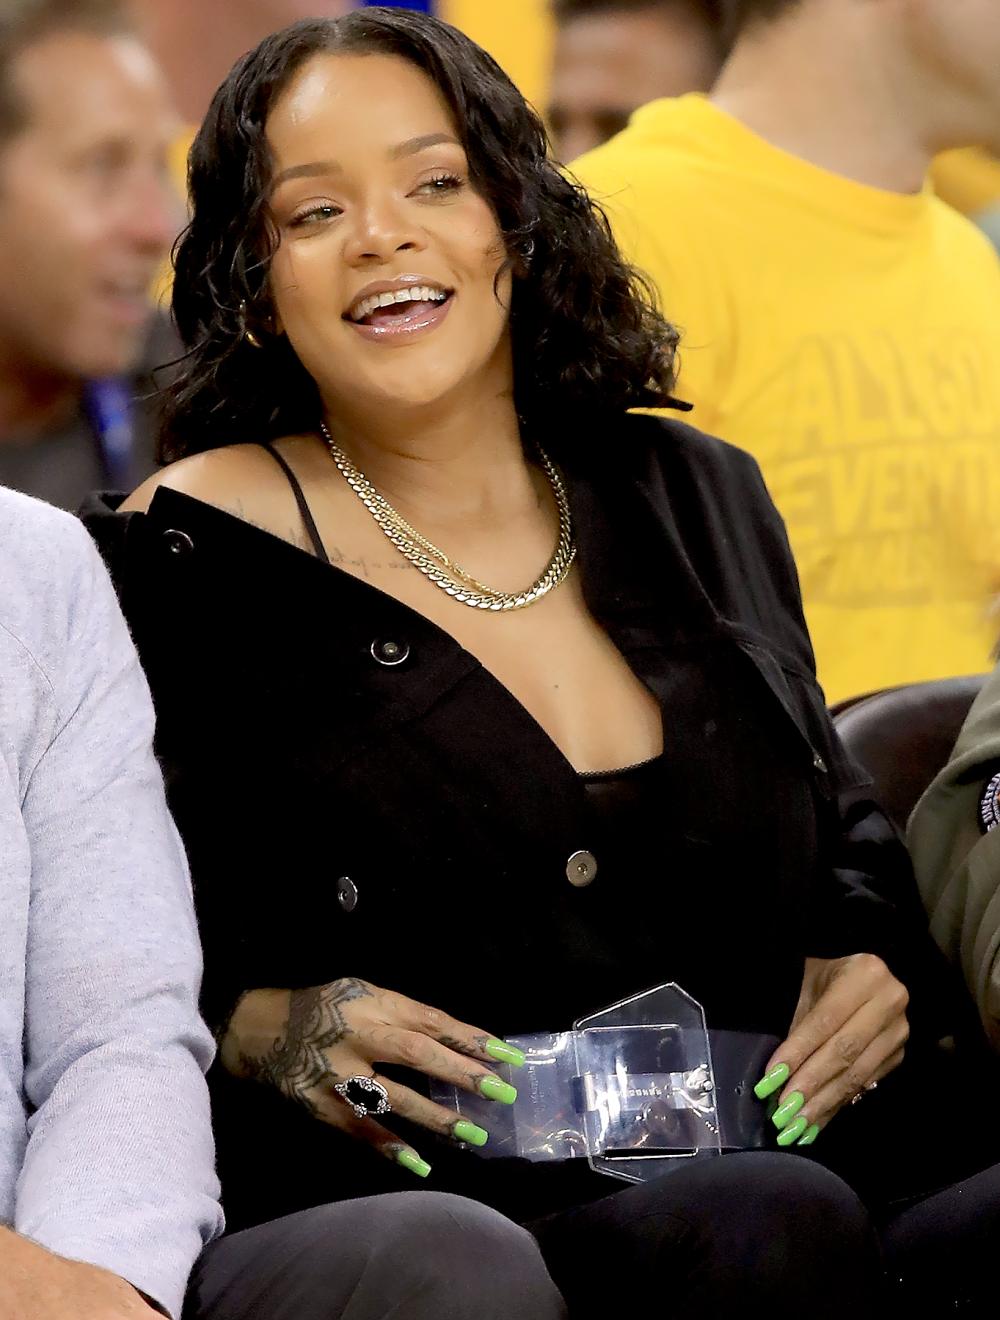 Rihanna attends Game 1 of the 2017 NBA Finals at ORACLE Arena on June 1, 2017 in Oakland, California.